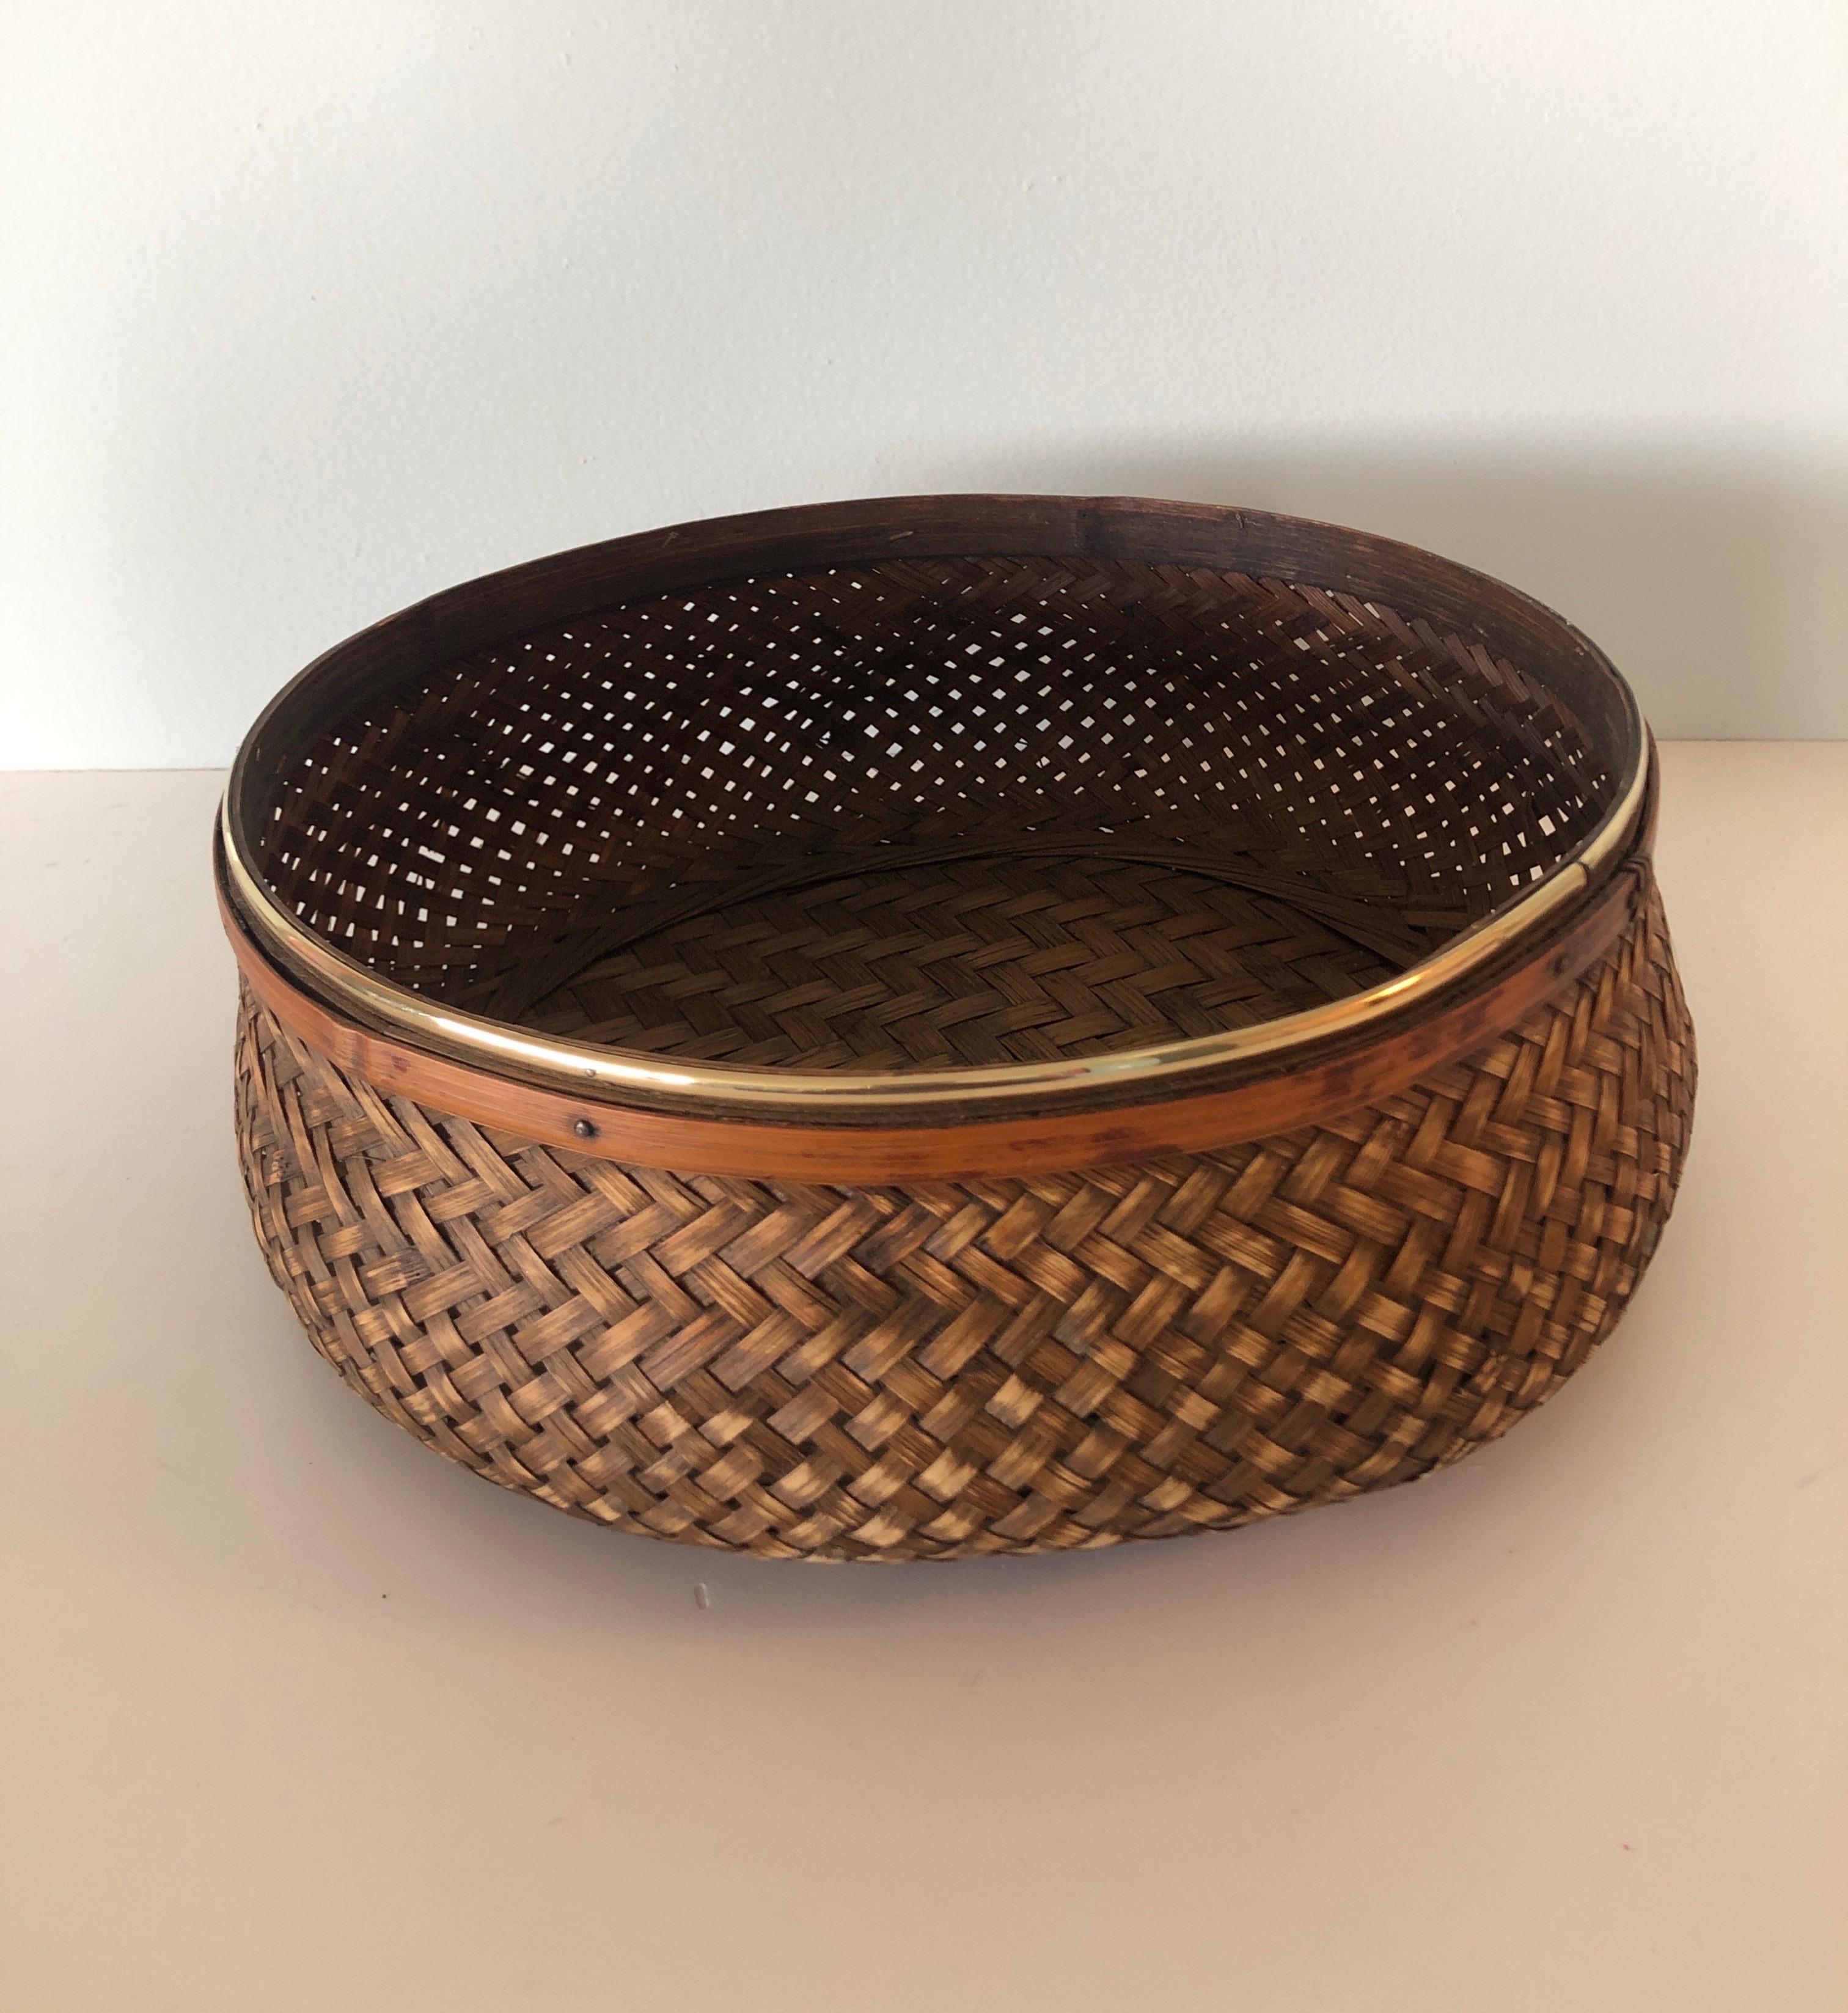 Woven Asian round serving basket, The small brass detail
is plastic not real brass.
Size: 11 x 11 x 4.75